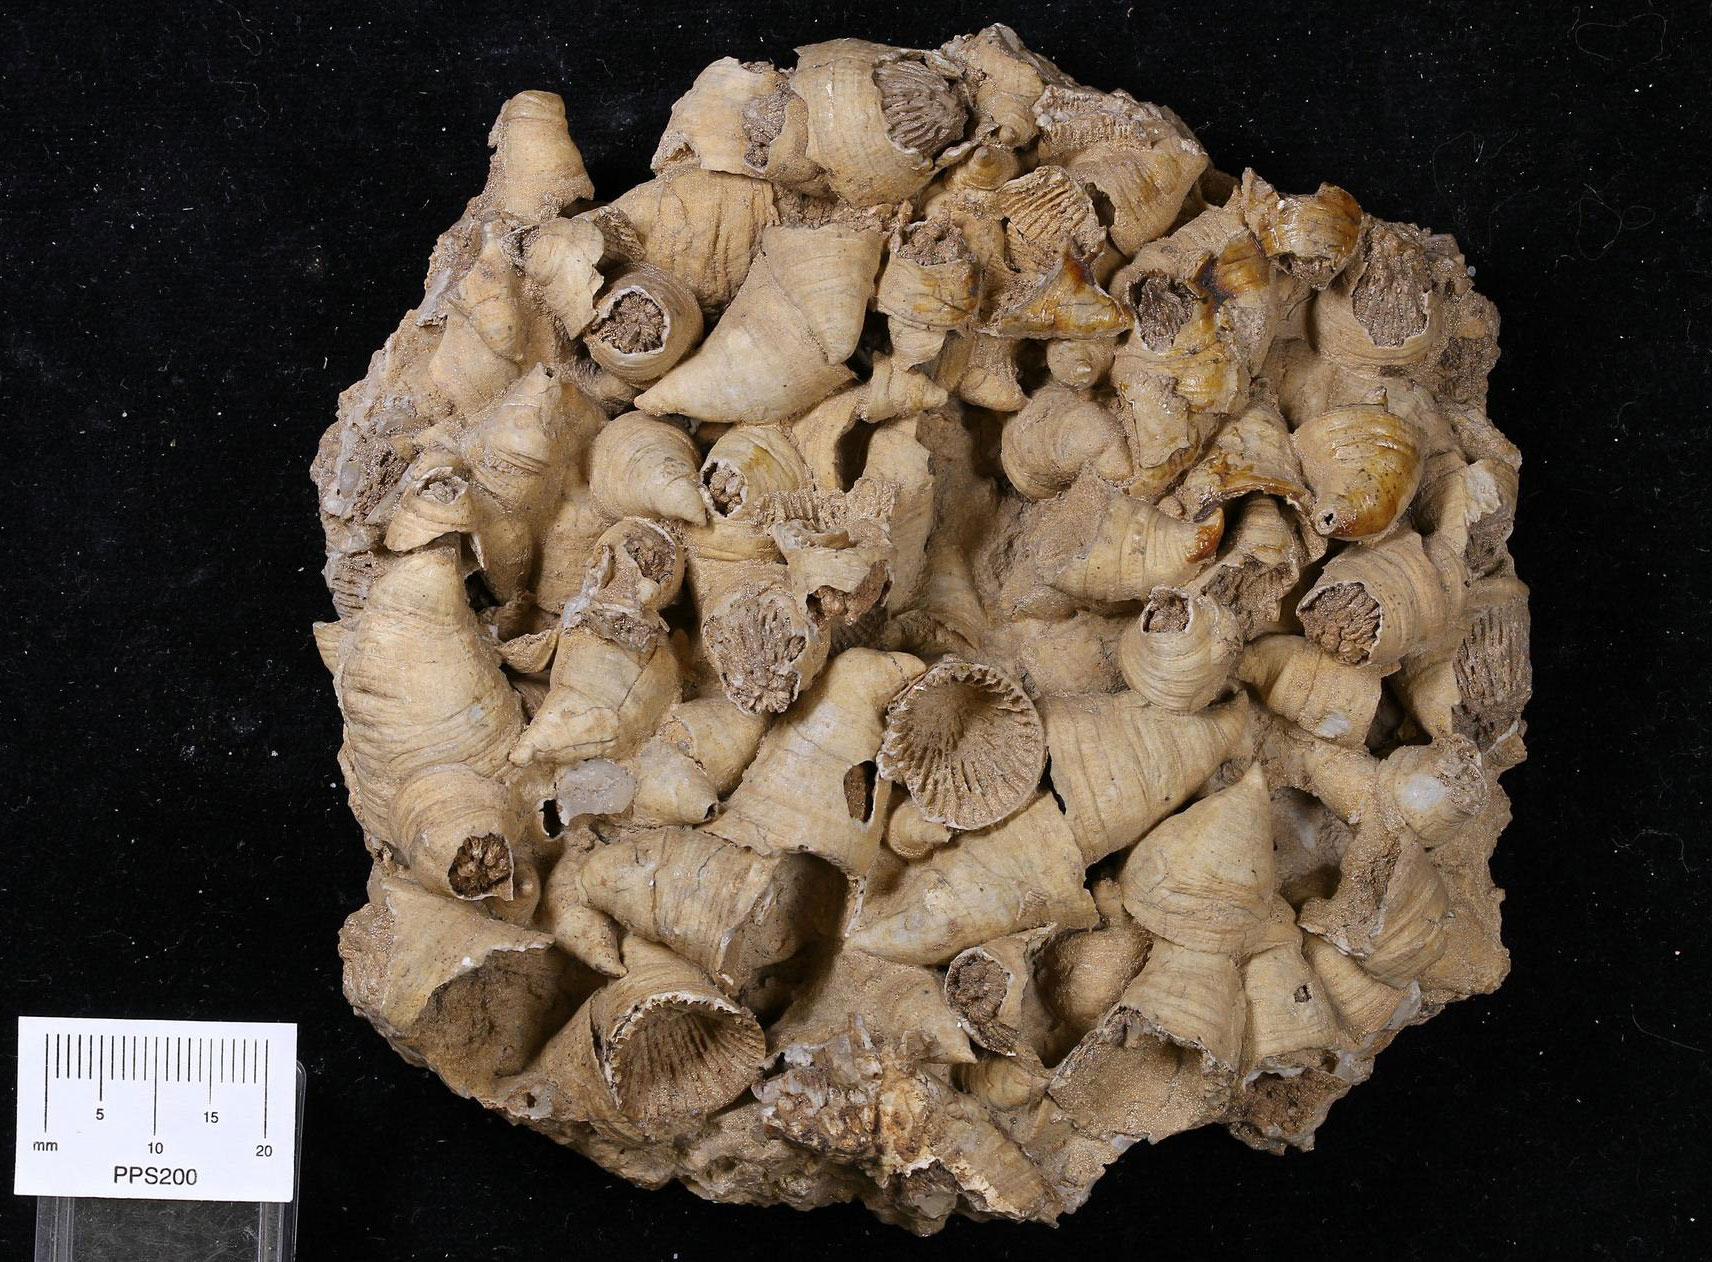 Photograph of a group of solitary rugose corals from the Ordovician of Wisconsin. The photo shows a group of randomly arranged, horn-shaped corals preserved in a dense aggregation. 